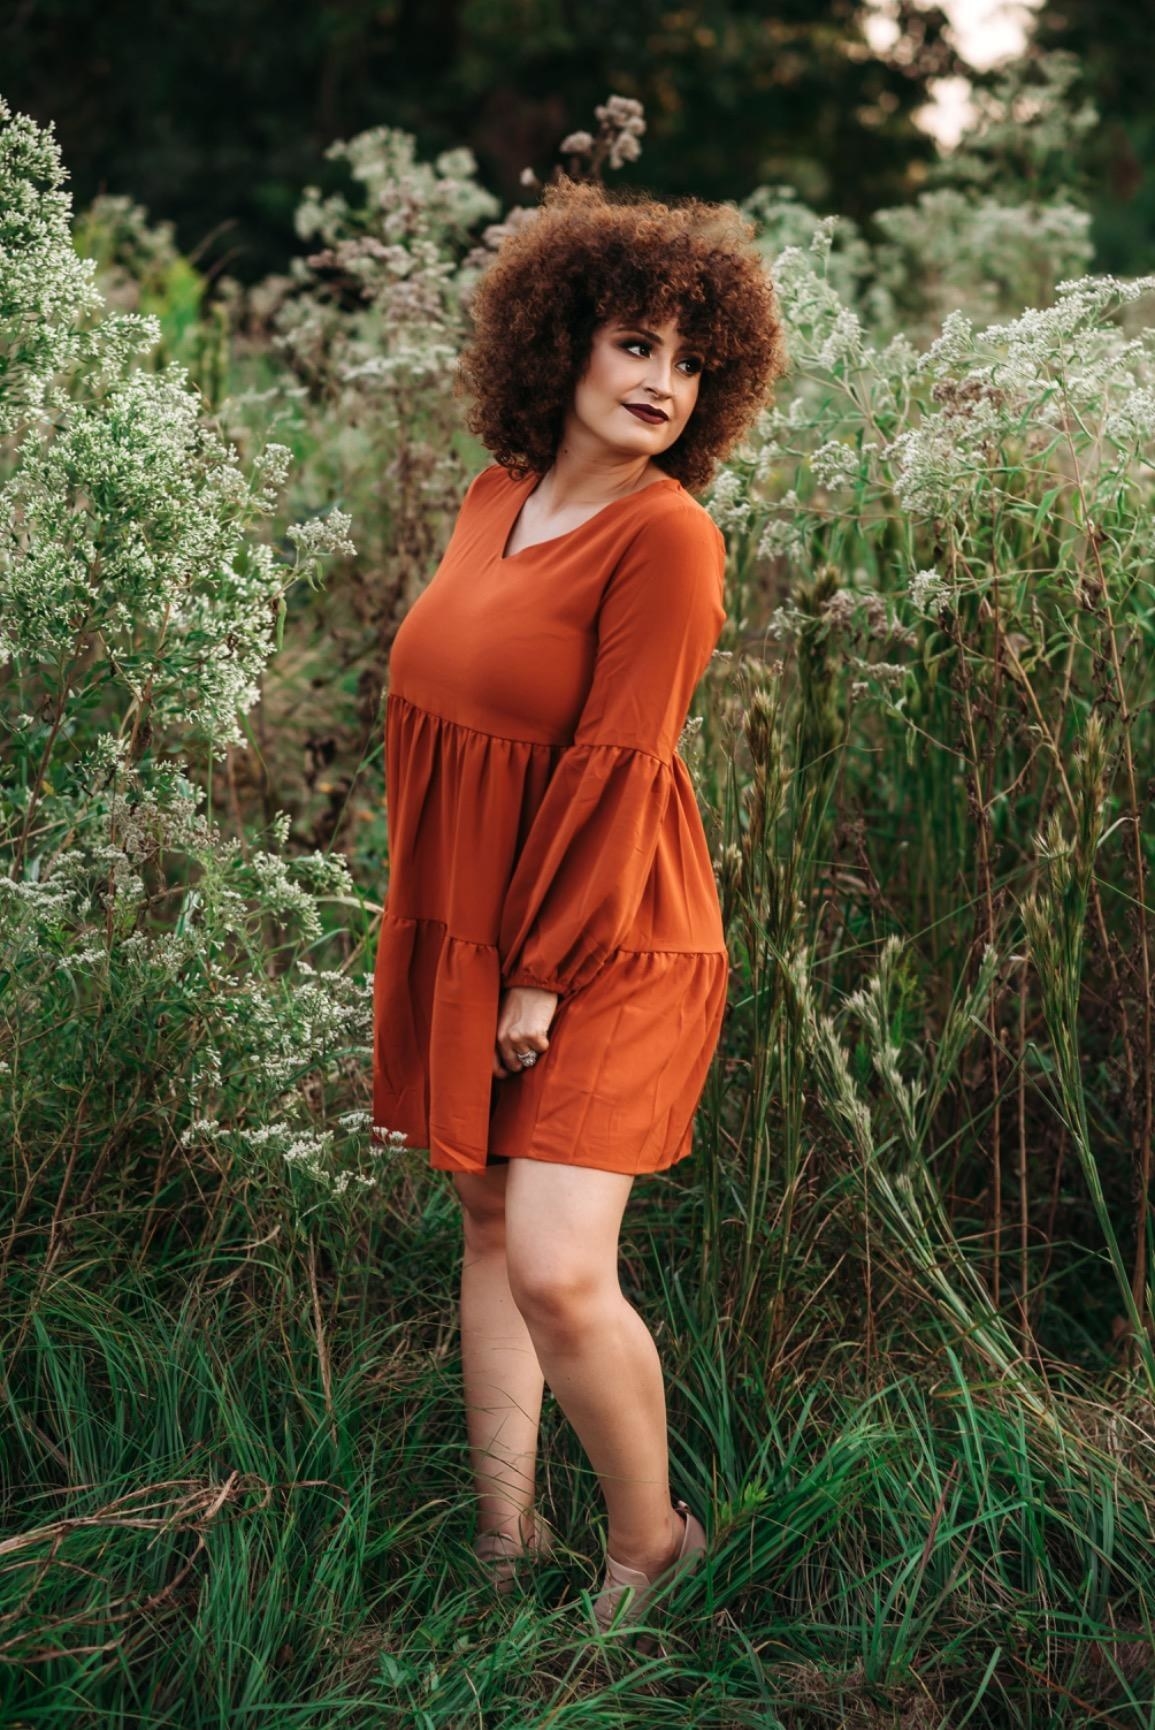 Reviewer wearing the orange dress and posing in a field